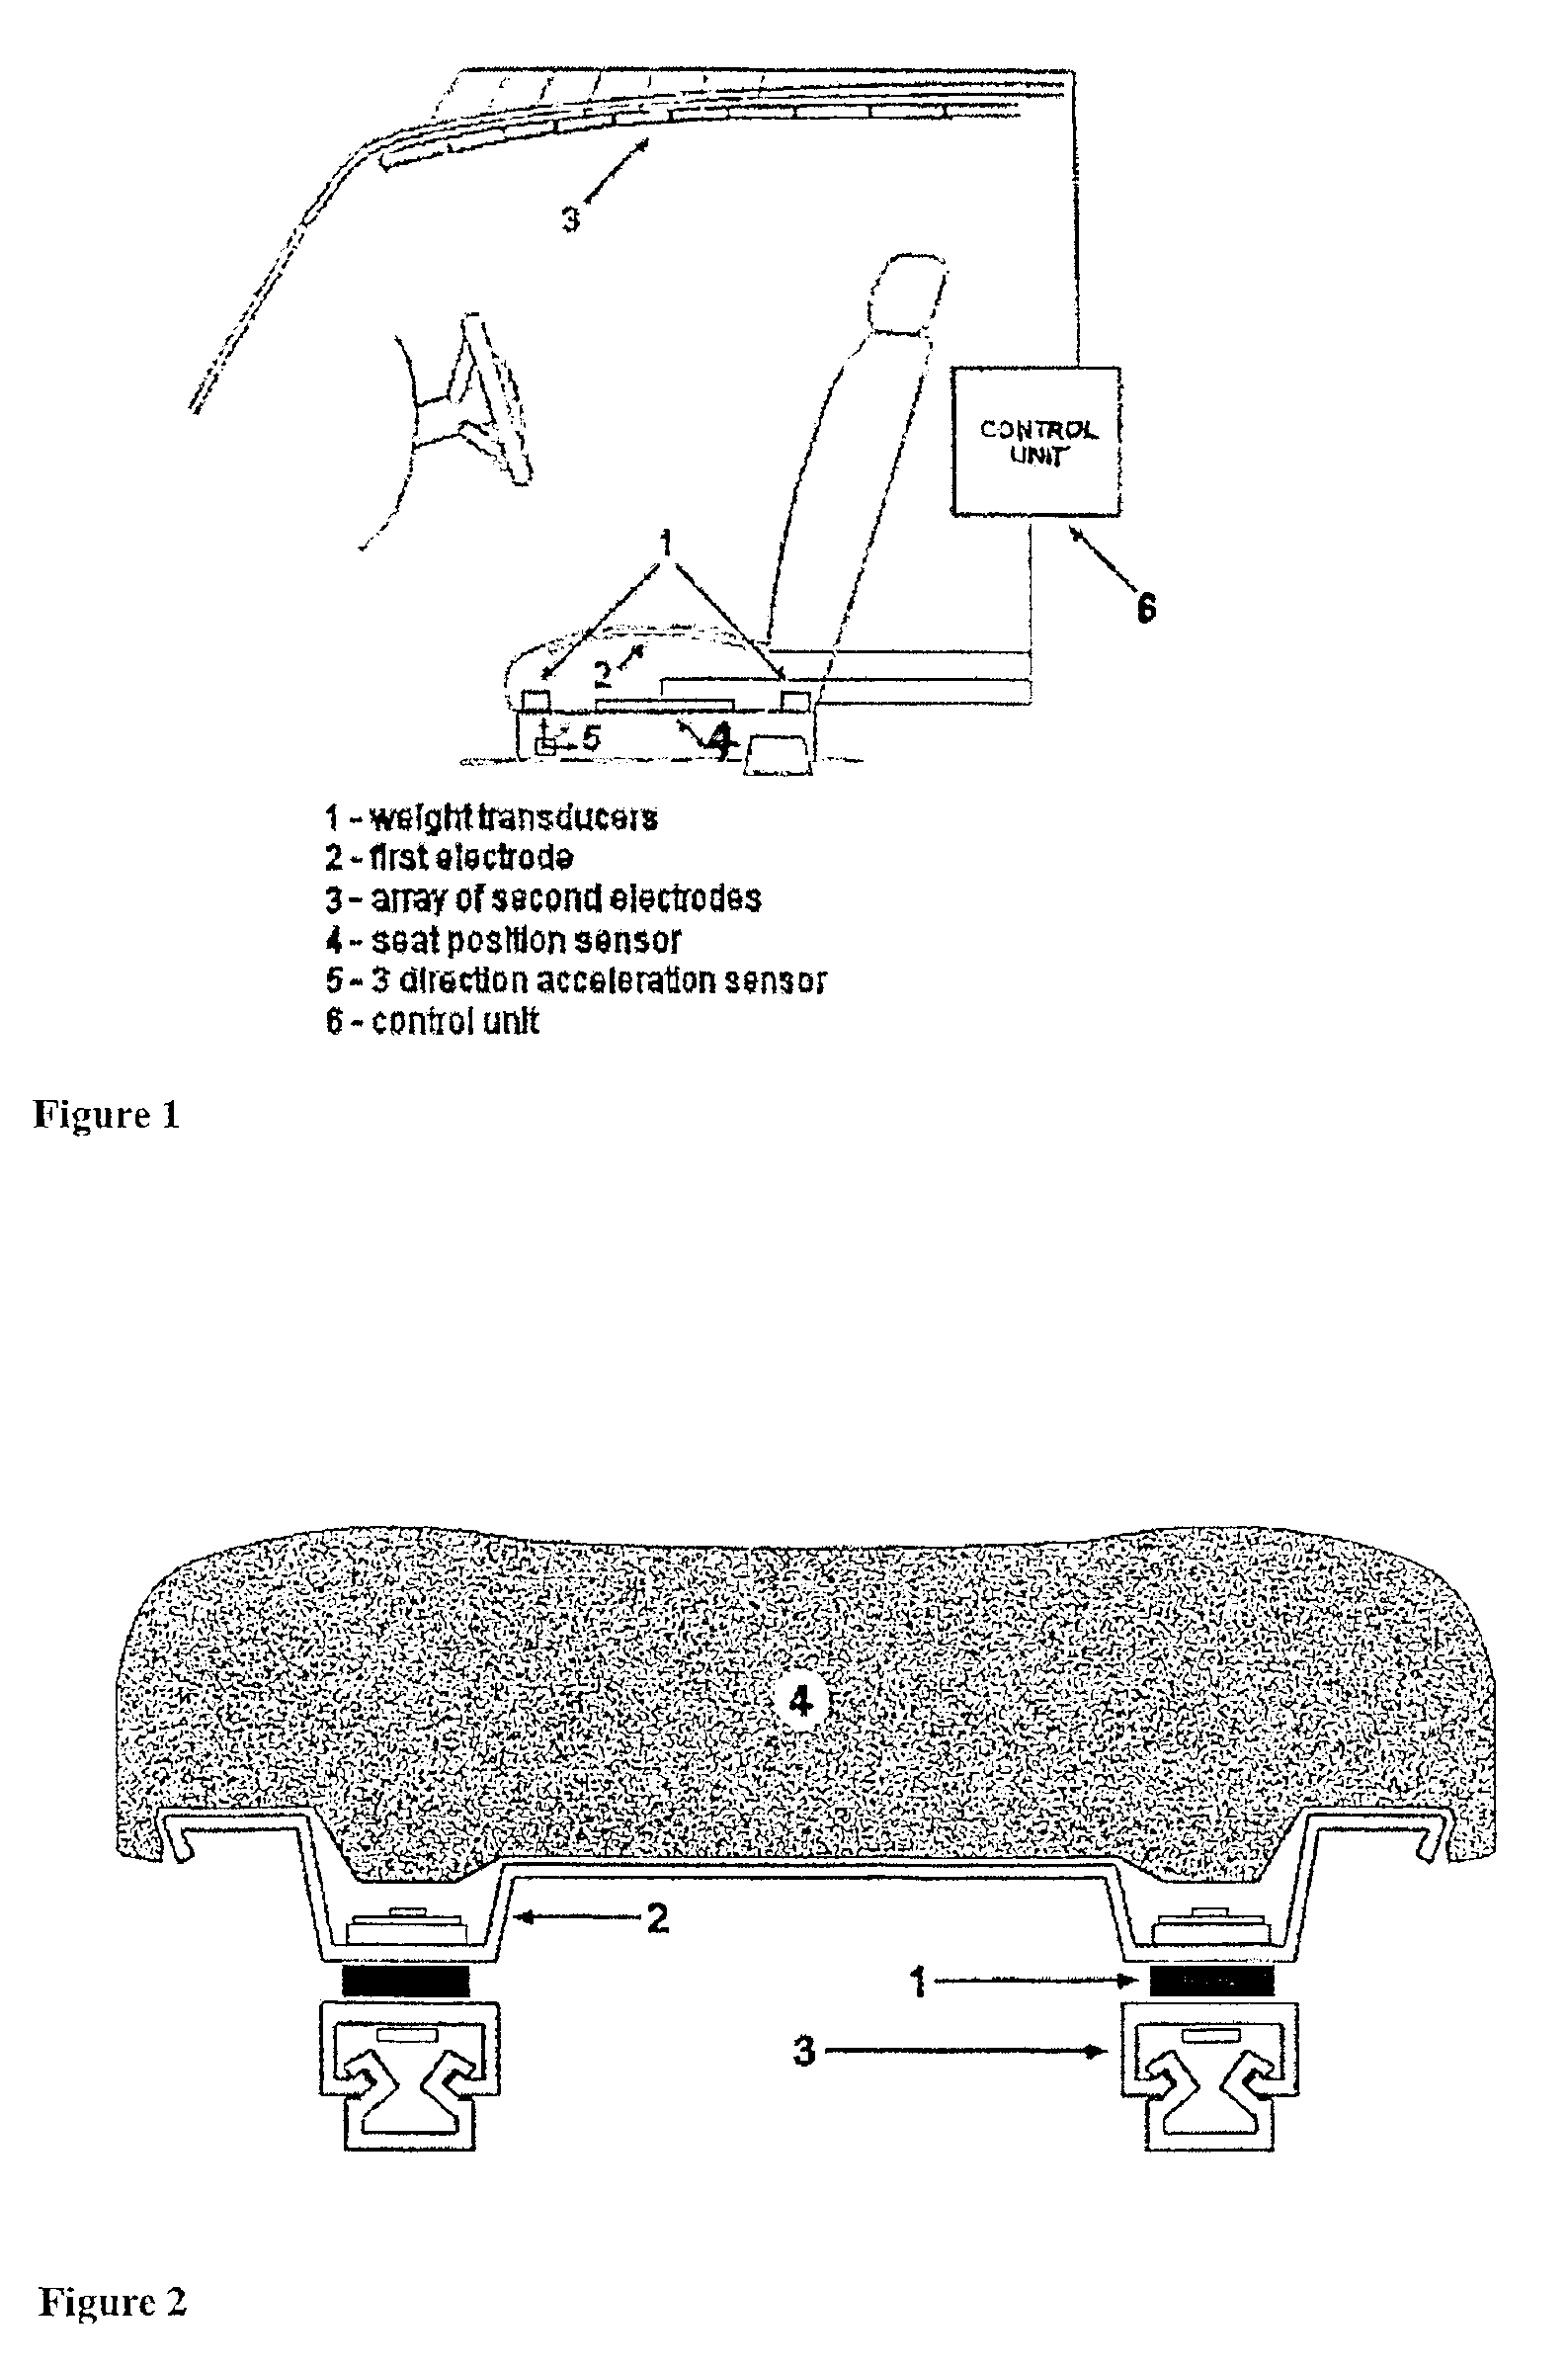 Vehicle occupant weight estimation apparatus